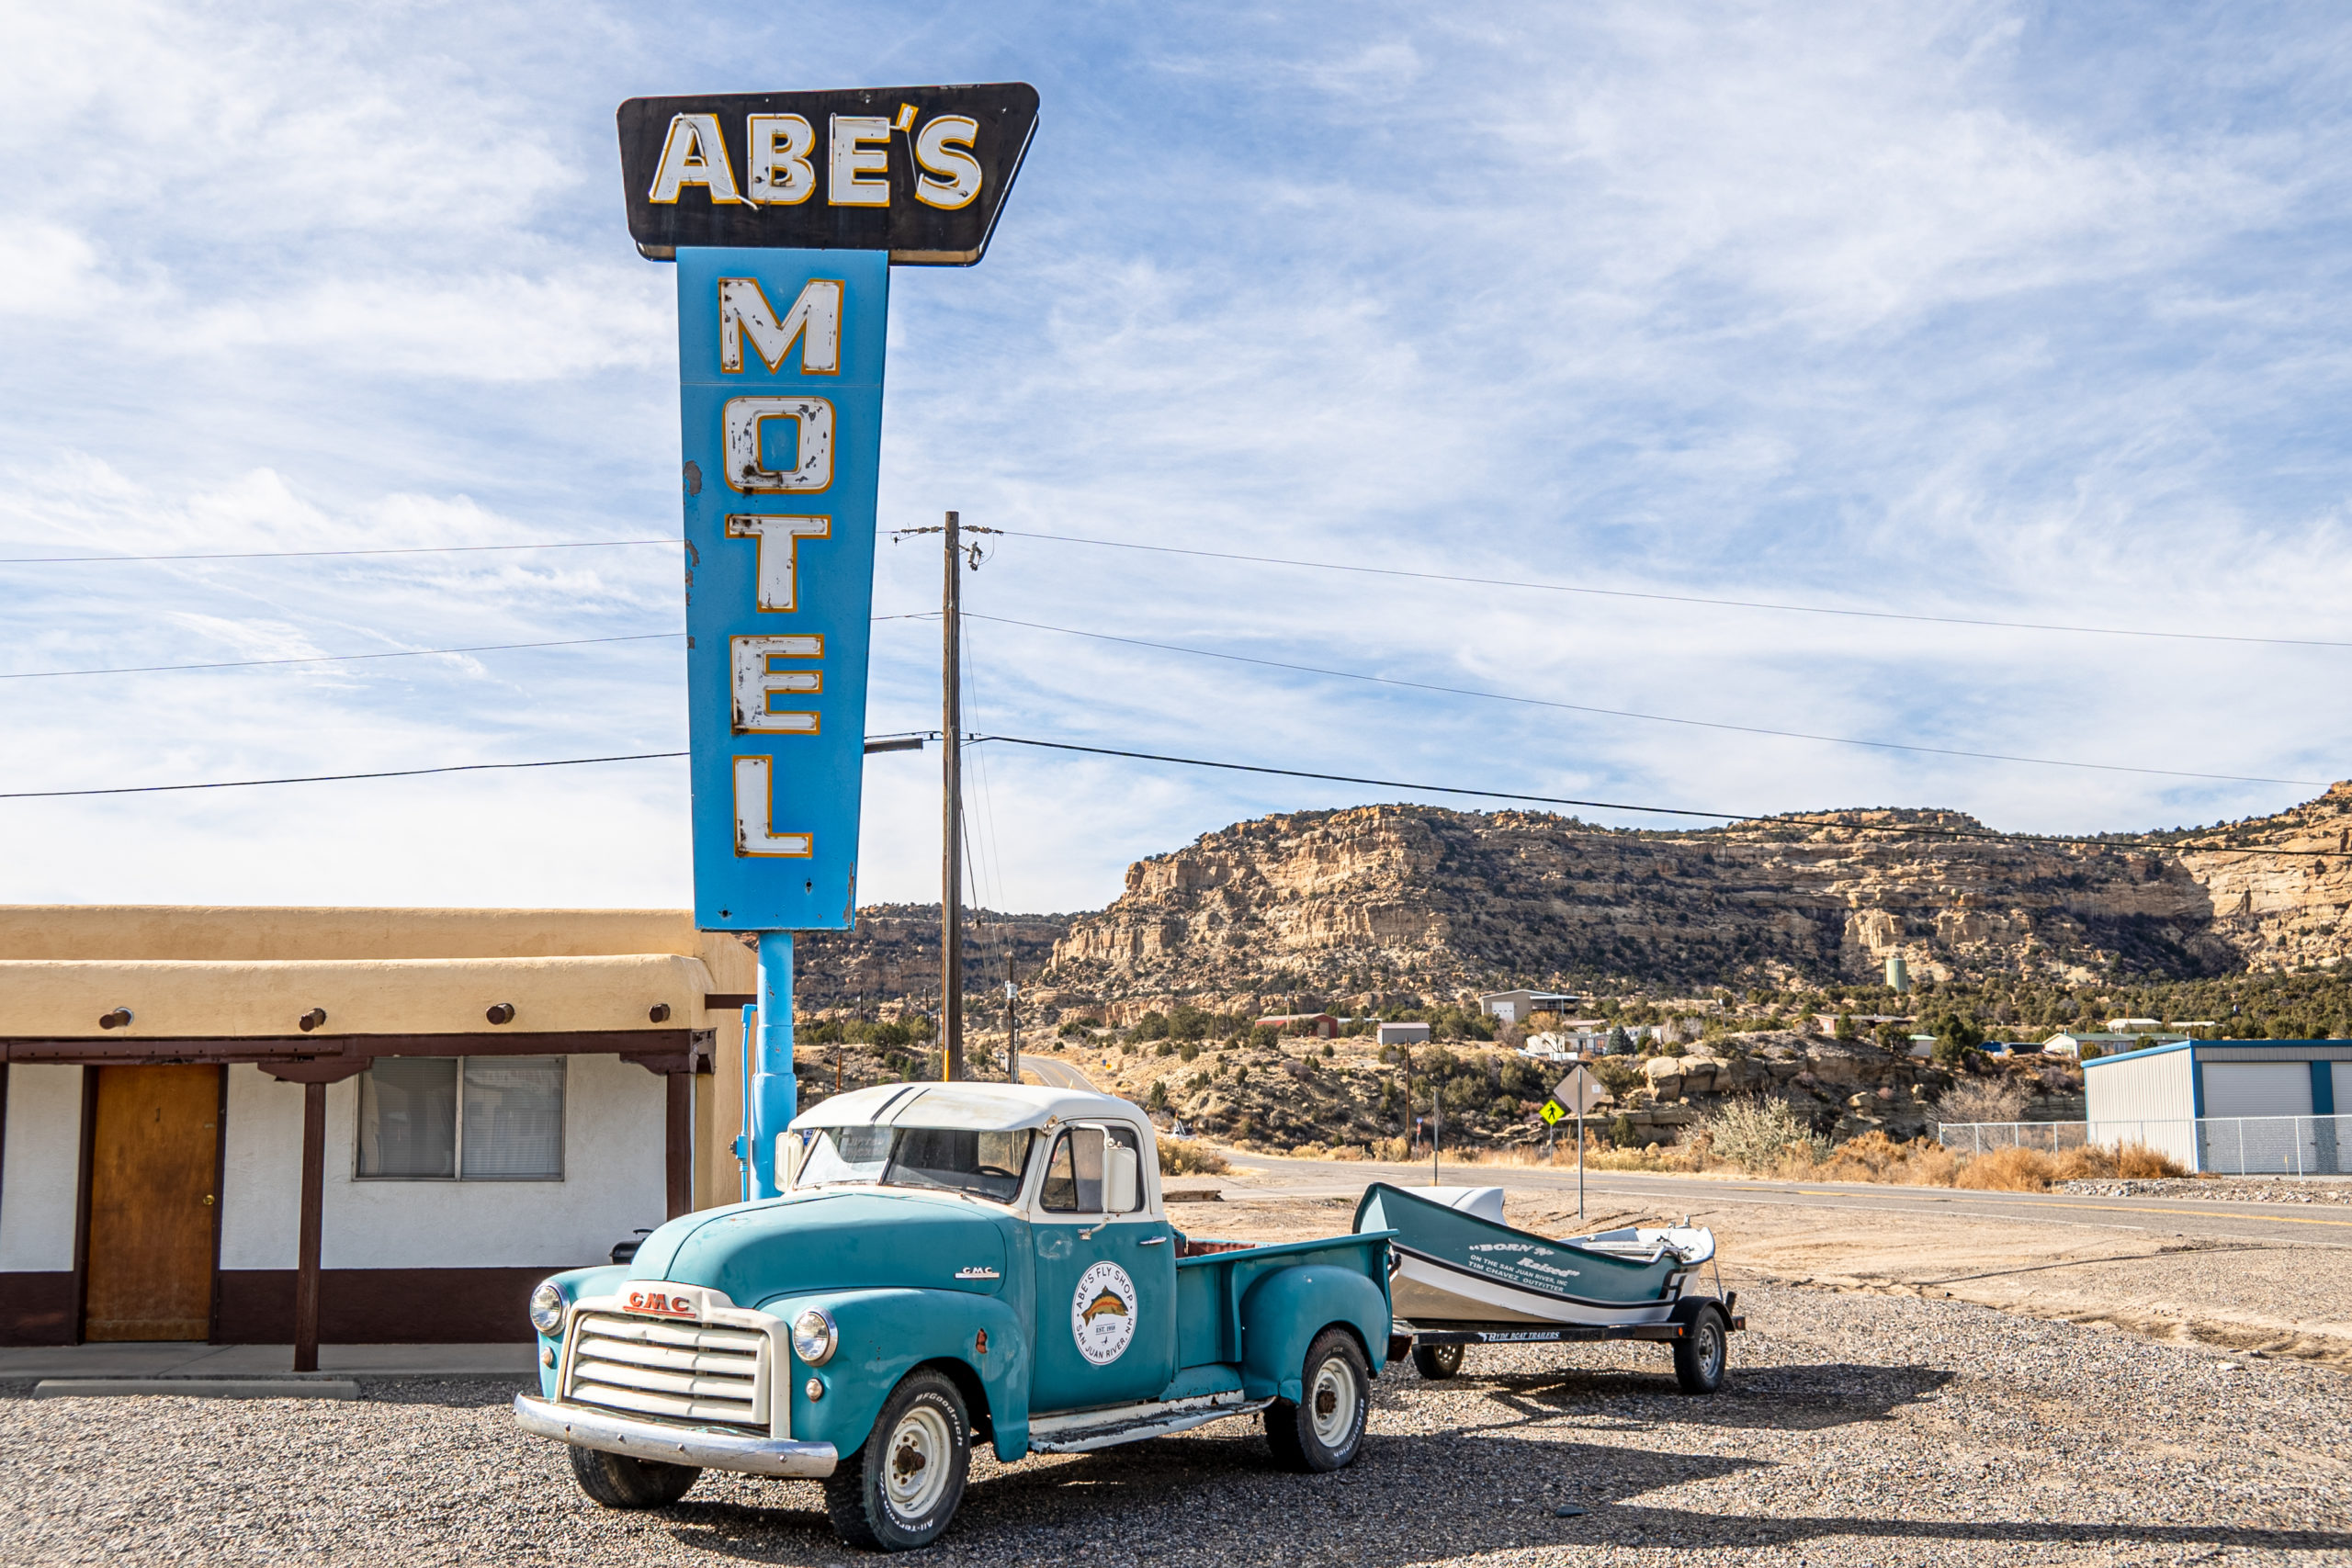 Abe's Motel and Fly Shop on the San Juan River